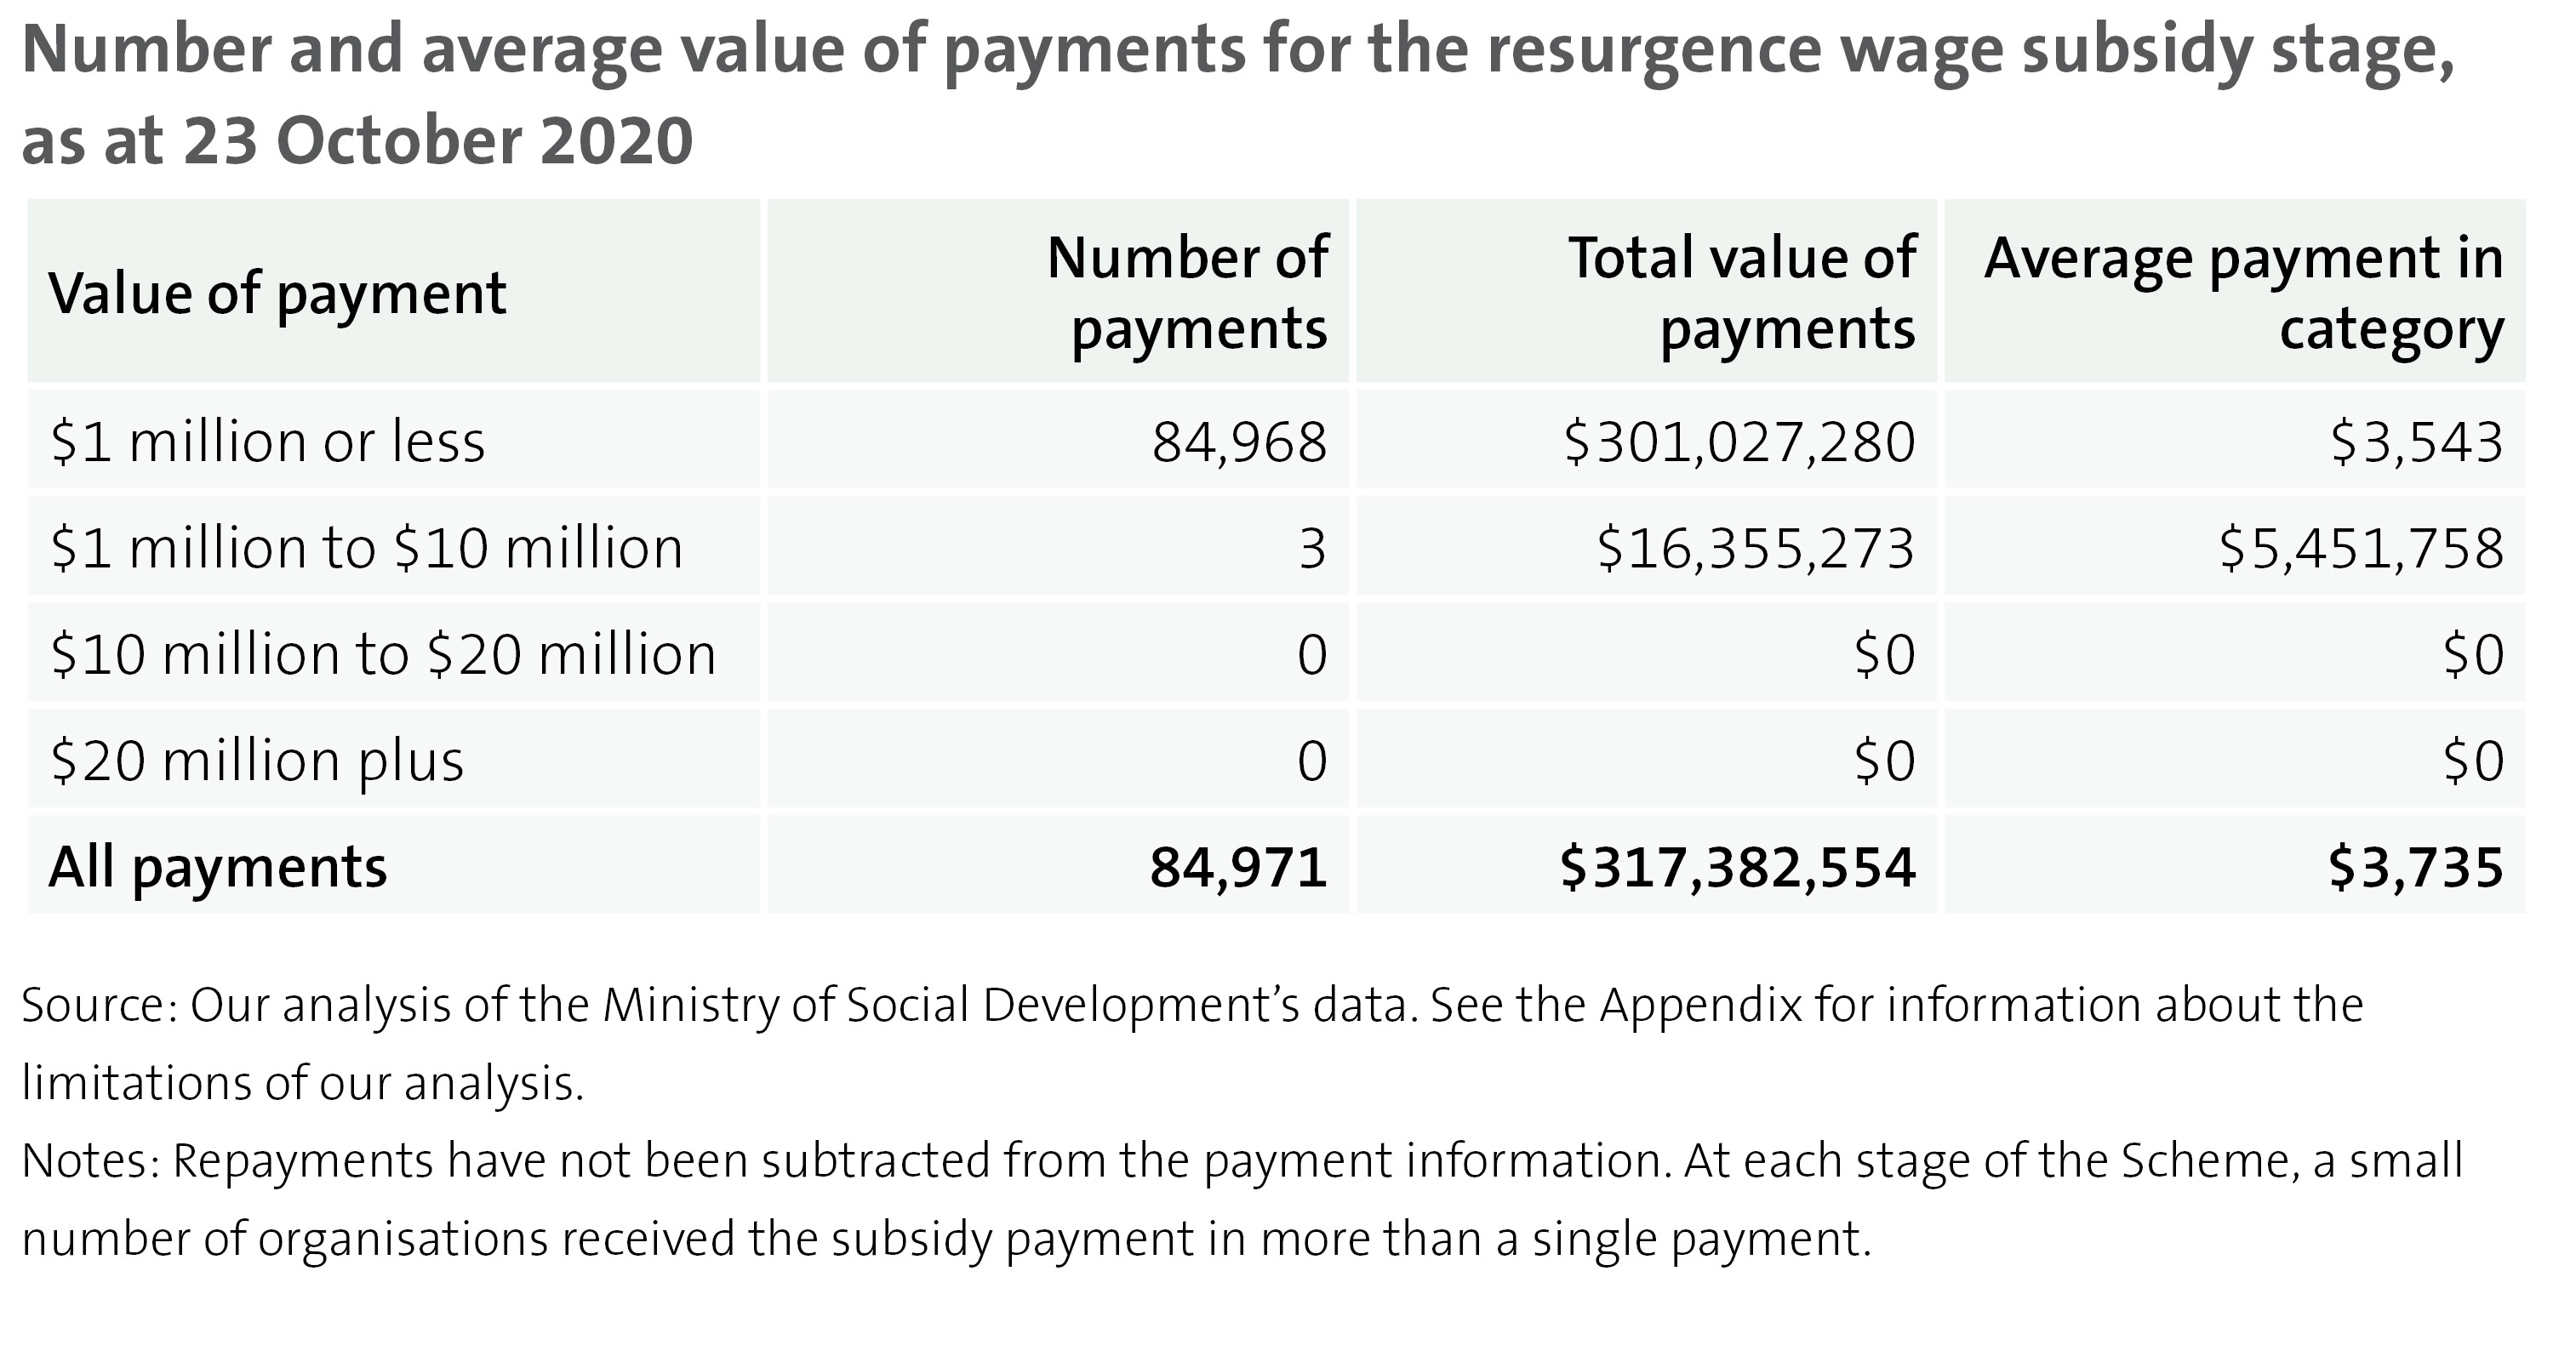 Figure 8 - Number and average value of payments for the resurgence wage subsidy stage, as at 23 October 2020